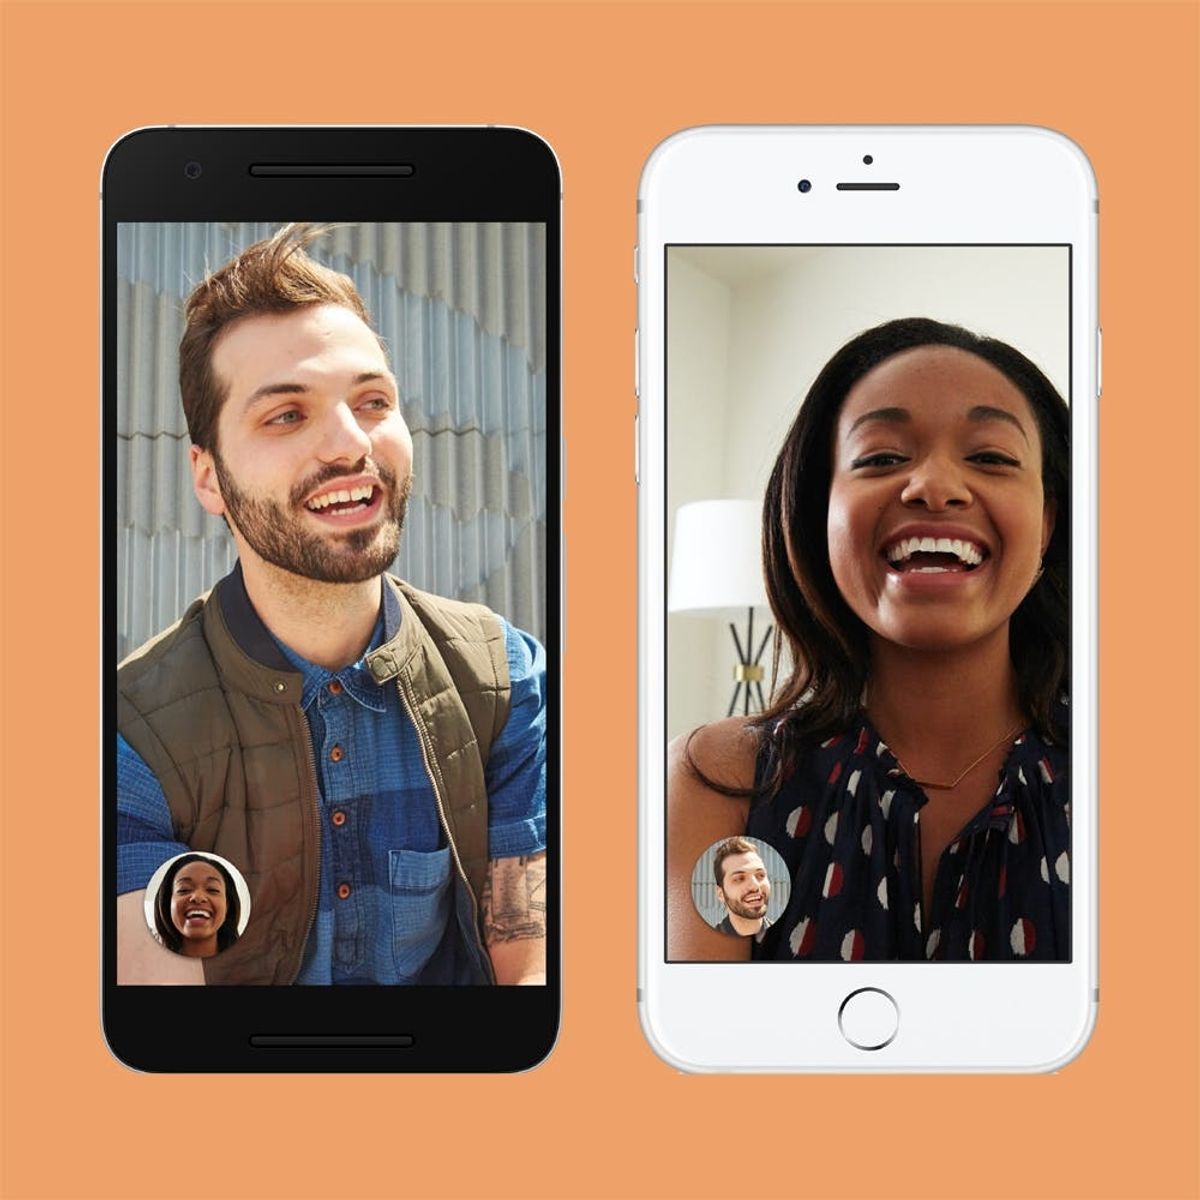 Google’s New App Will Give Apple’s FaceTime a Run for Its Money